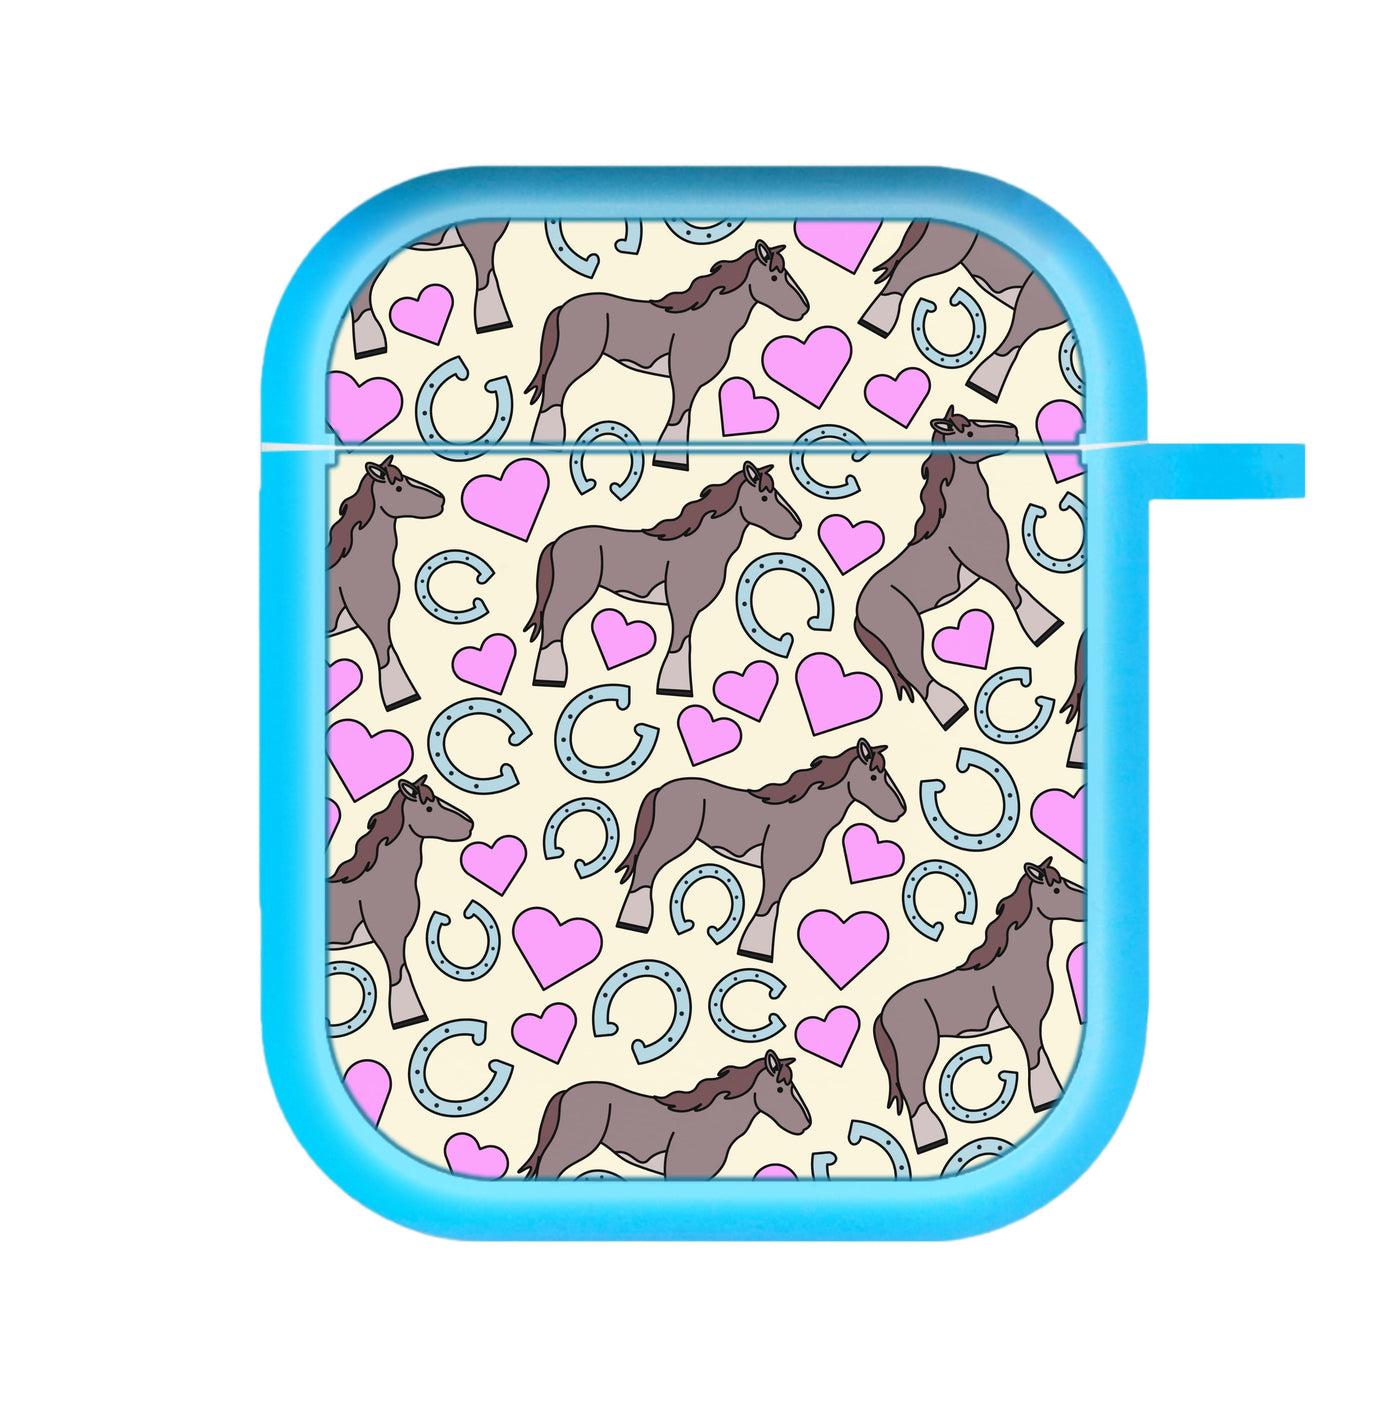 Horses And Horseshoes Pattern - Horses AirPods Case